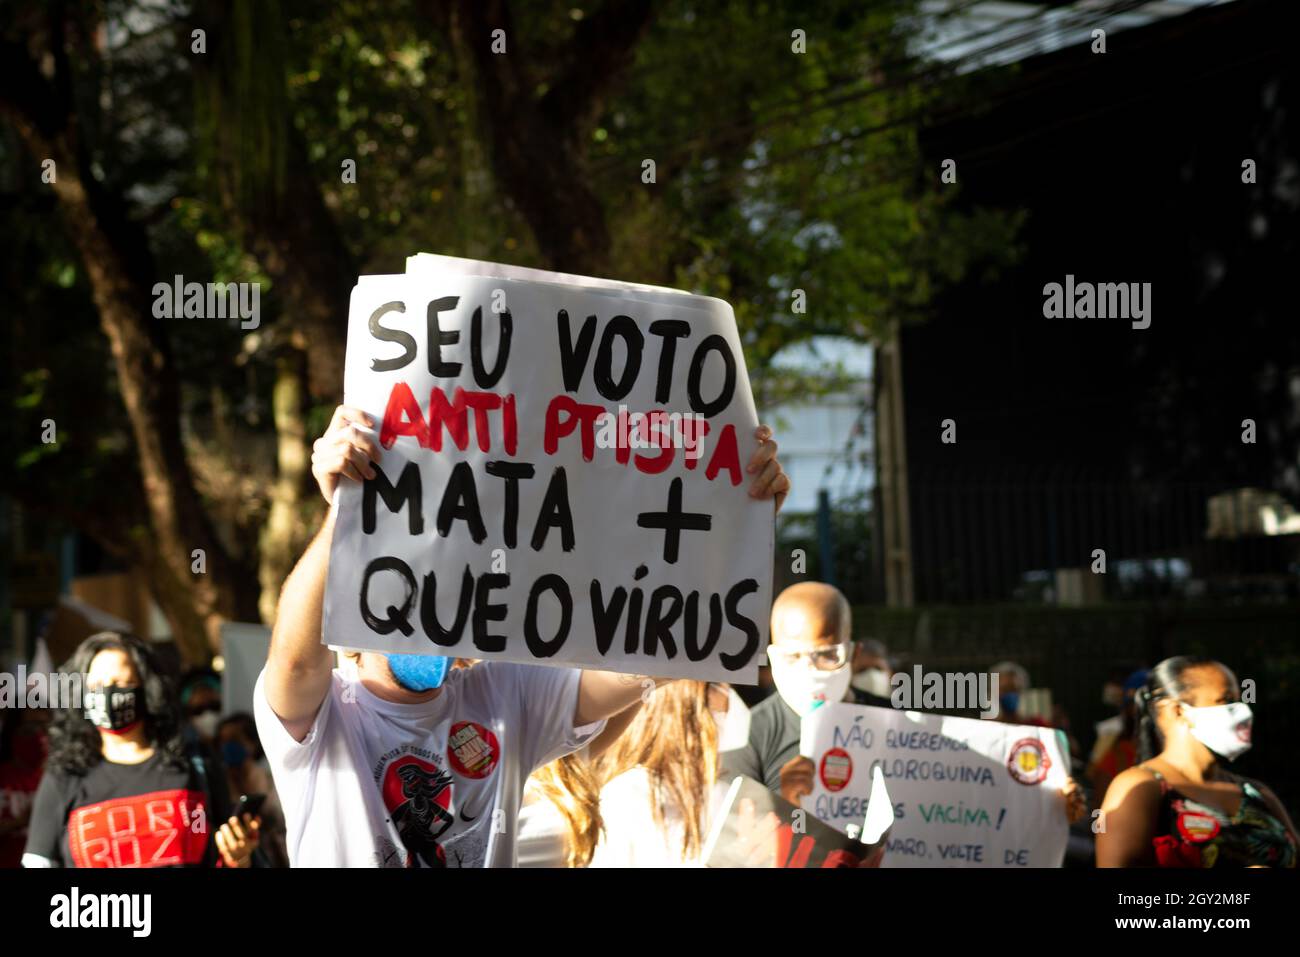 Salvador, Bahia, Brazil - June 19, 2021: Protesters protest against the government of President Jair Bolsonaro in the city of Salvador. Stock Photo